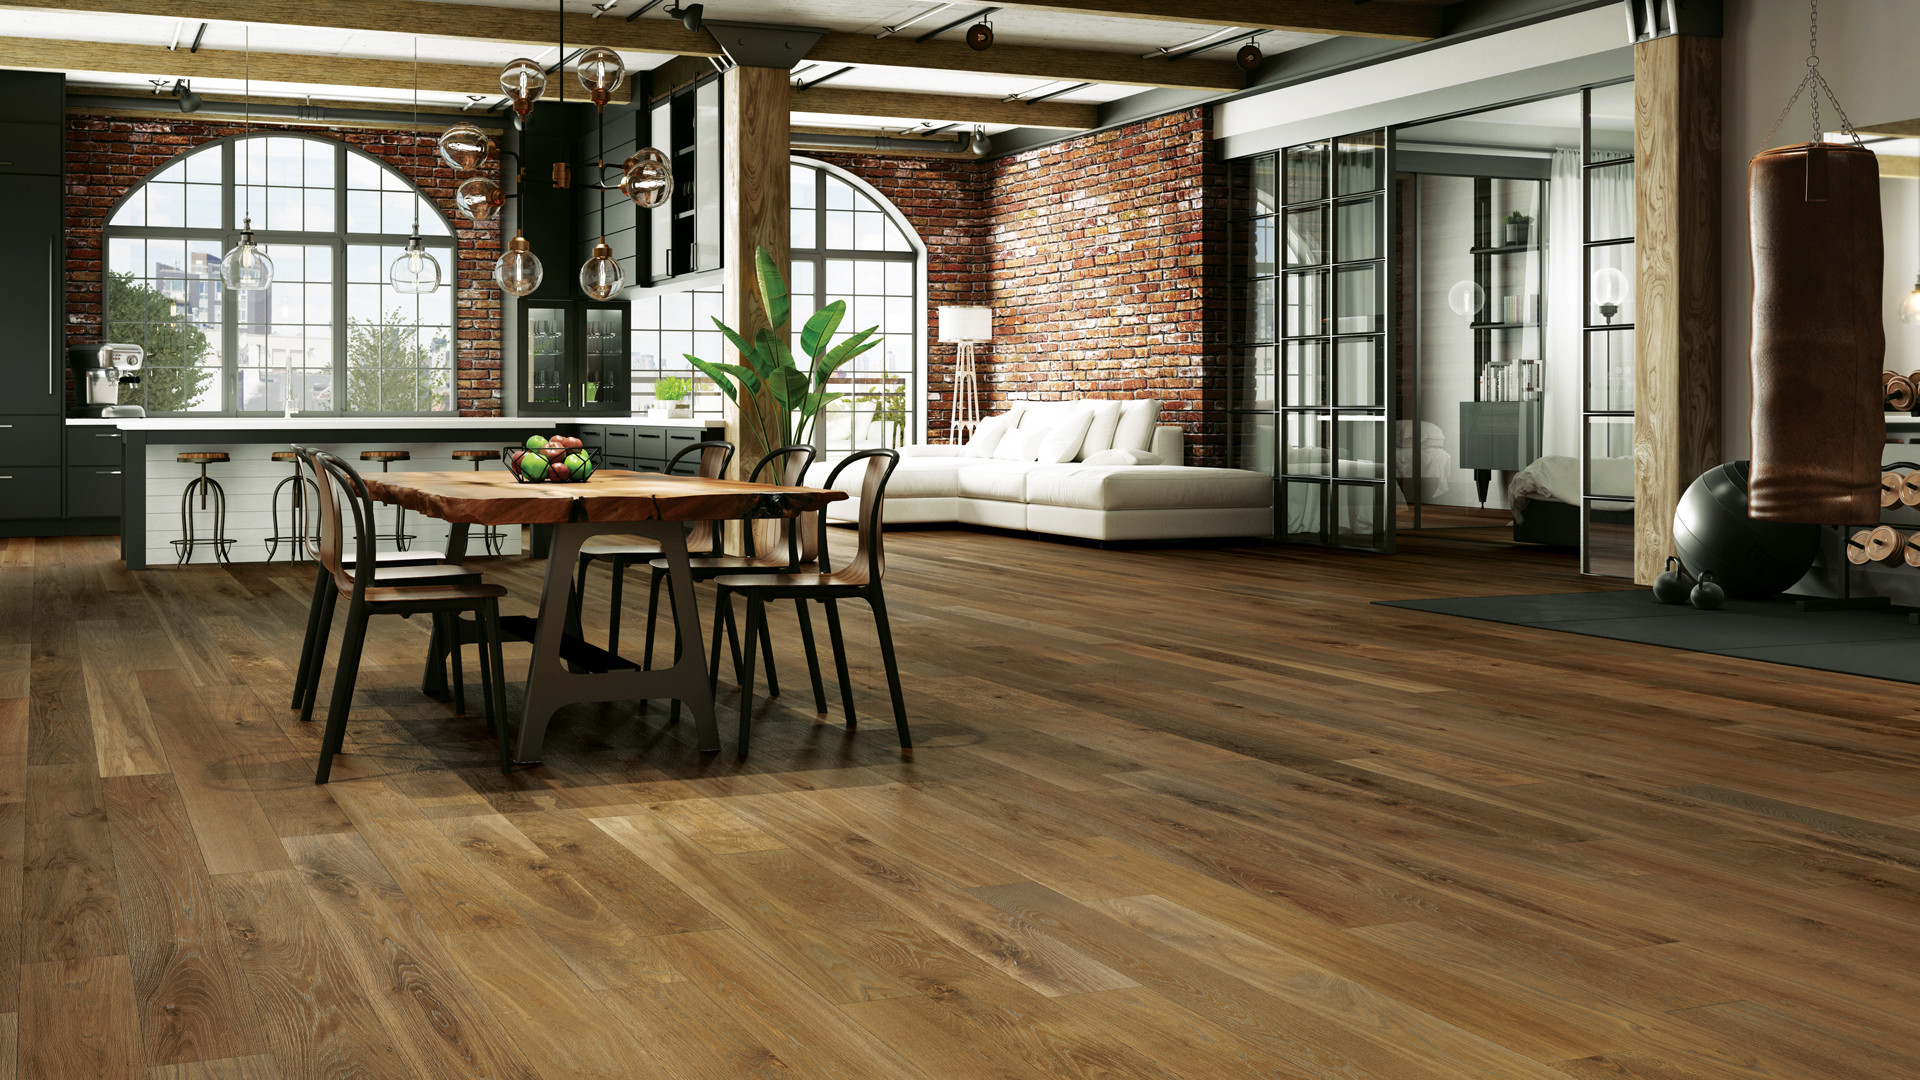 25 Great Hardwood Floor Trends 2018 2024 free download hardwood floor trends 2018 of 4 latest hardwood flooring trends of 2018 lauzon flooring regarding combined with a wire brushed texture and an ultra matte sheen these new 7ac2bd wide white oa